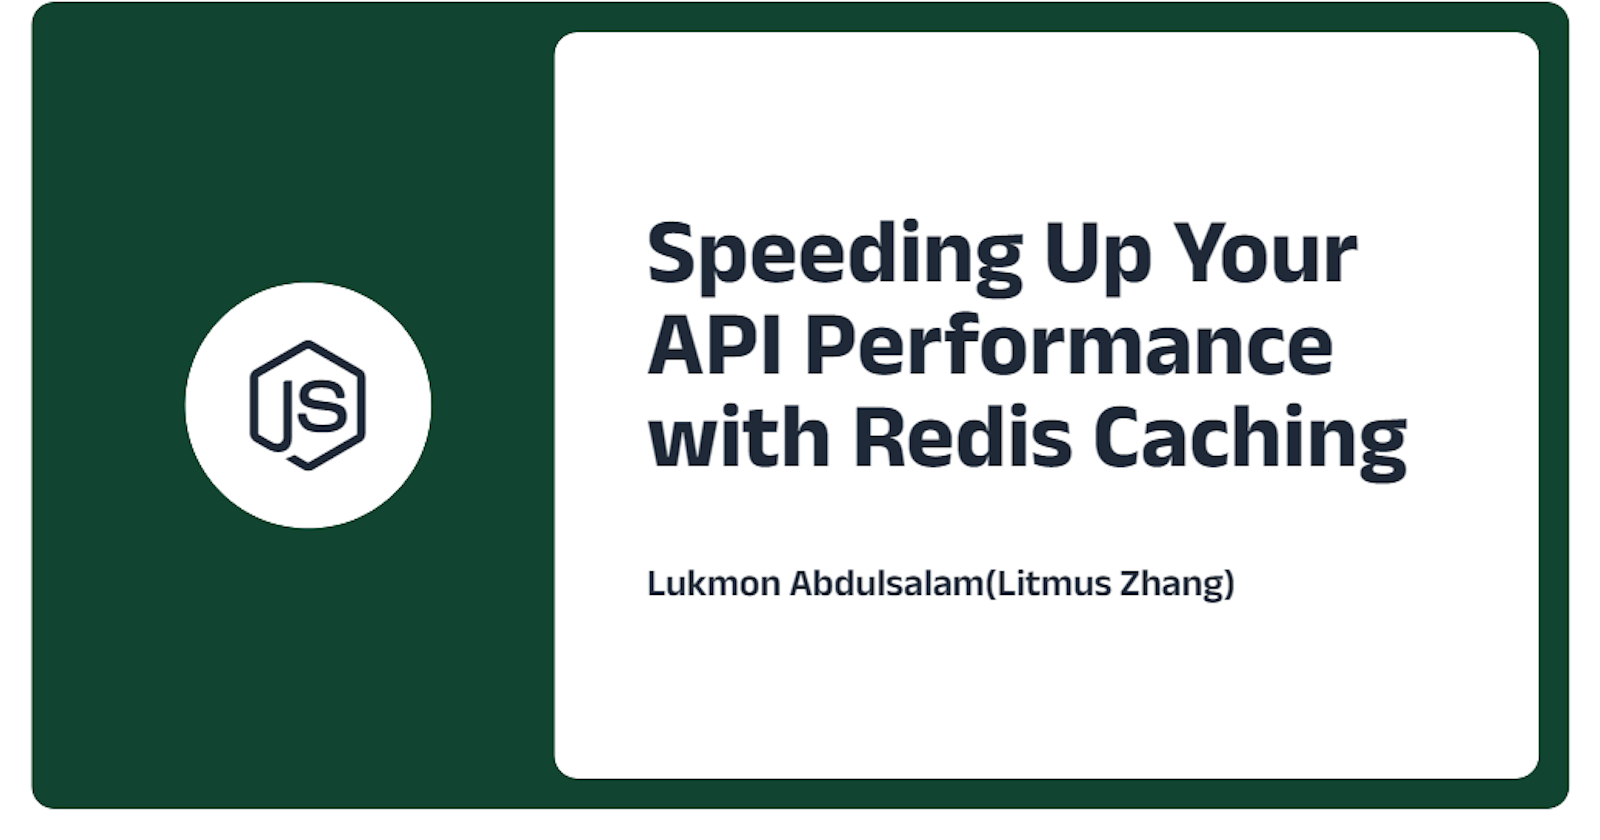 Speeding Up Your API Performance with Redis Caching